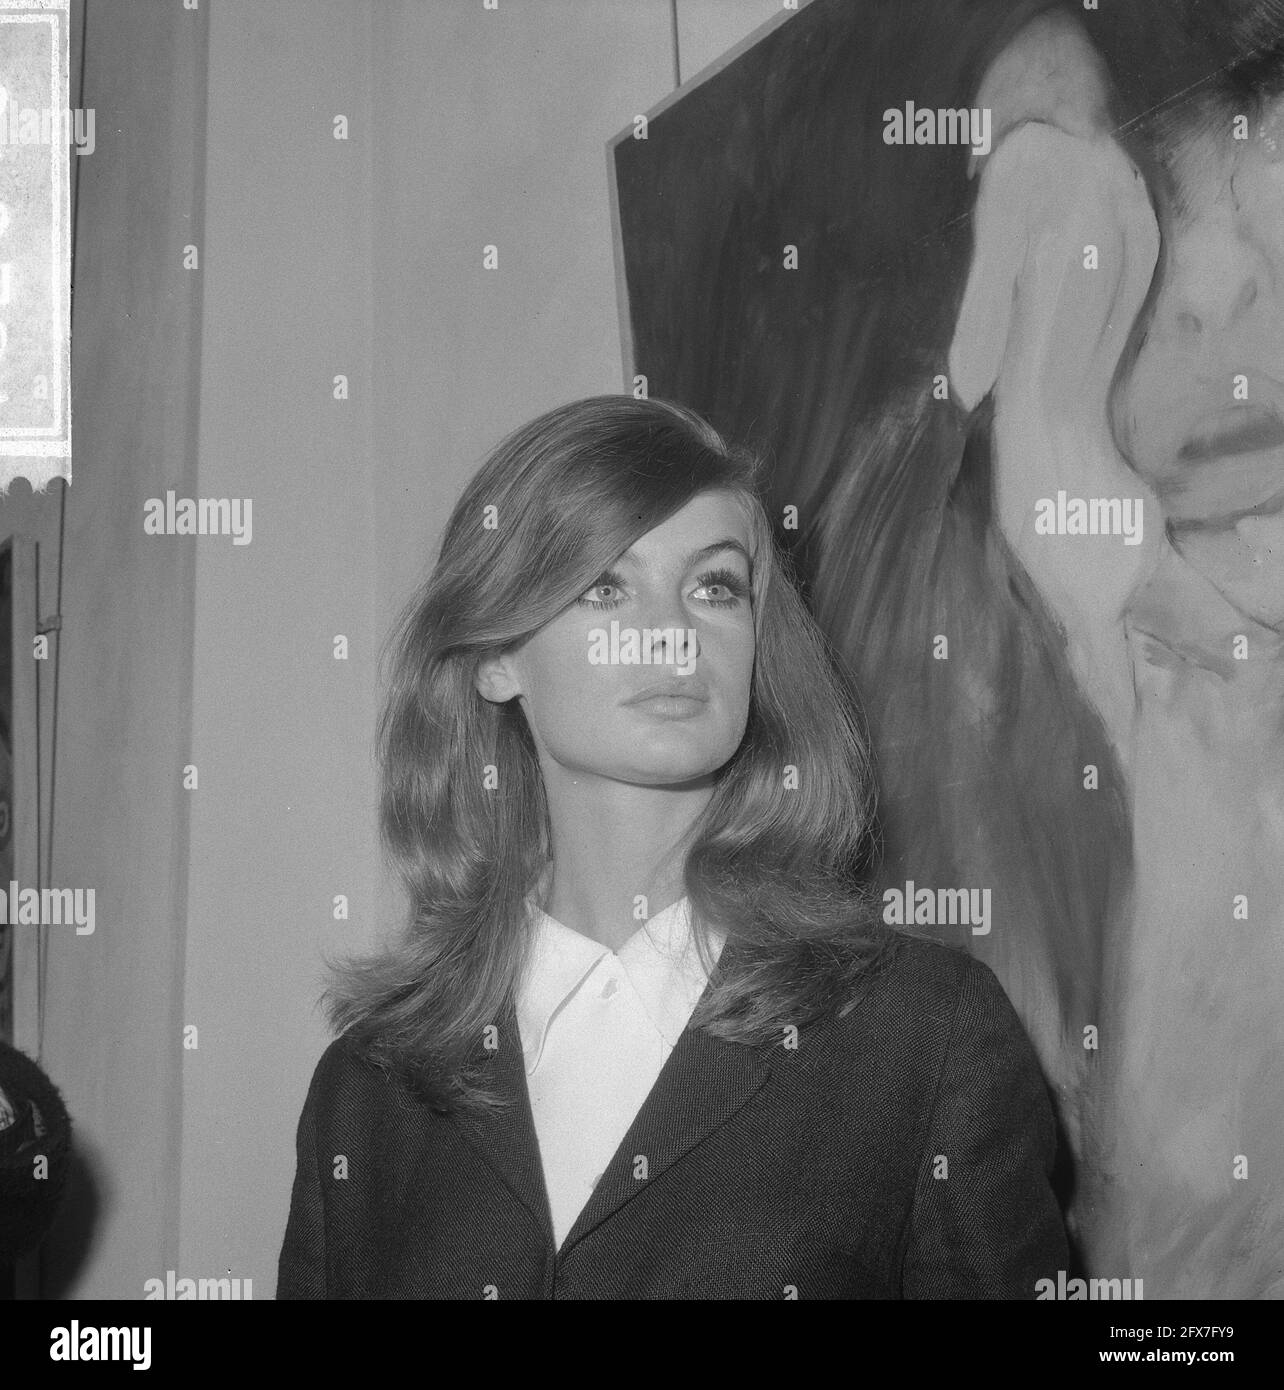 Jean Shrimpton (fashion model) exhibition opened at Galerie Krikhaar in Amsterdam, September 17, 1965, exhibitions, The Netherlands, 20th century press agency photo, news to remember, documentary, historic photography 1945-1990, visual stories, human history of the Twentieth Century, capturing moments in time Stock Photo